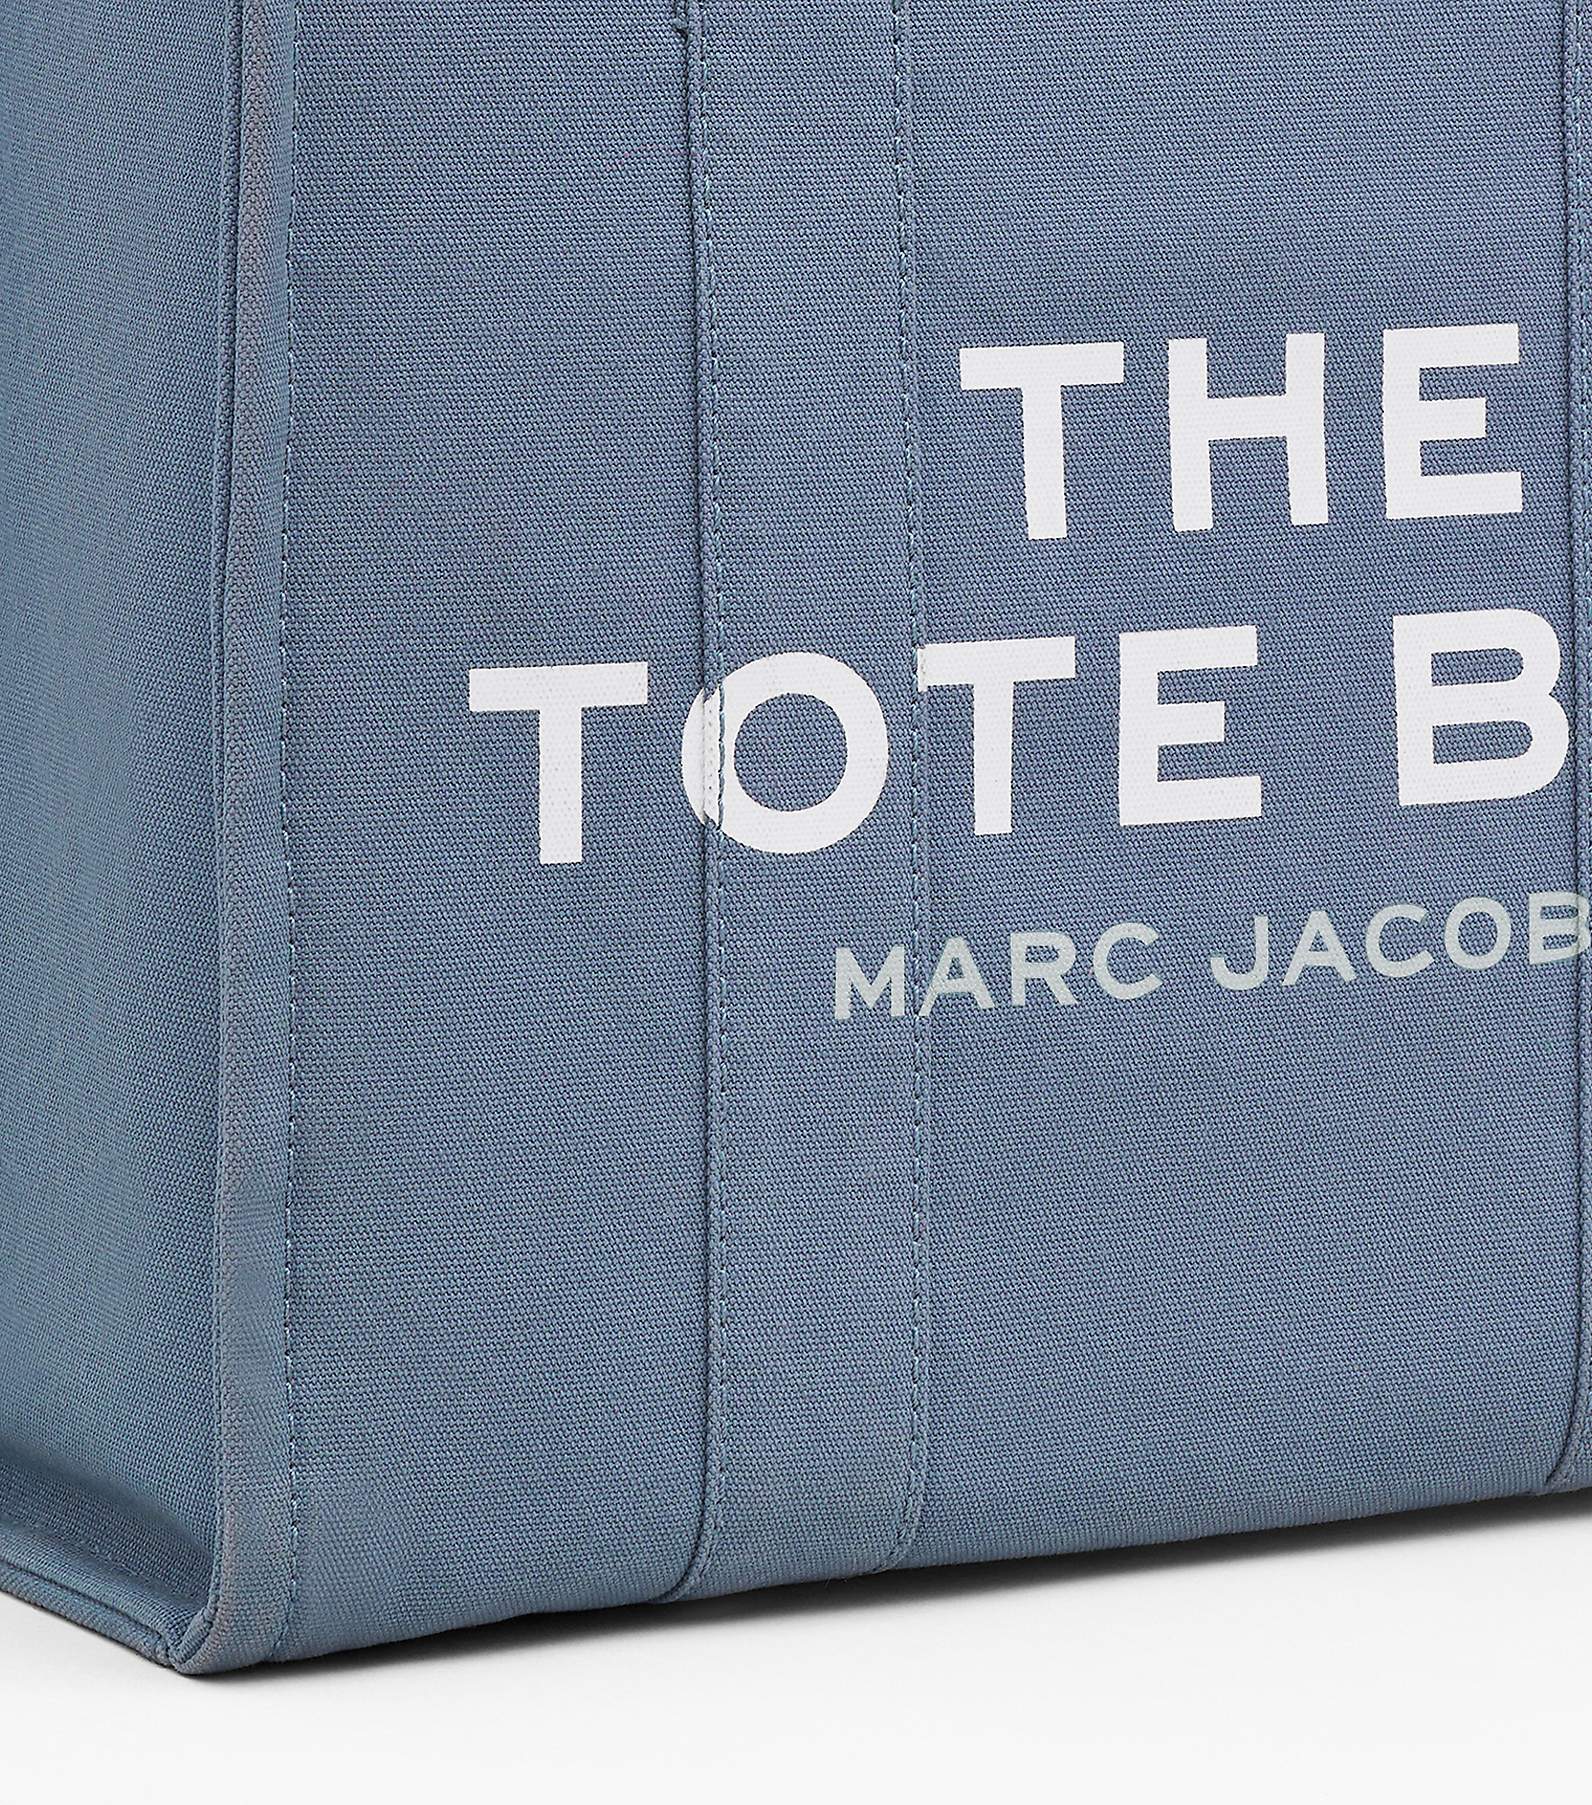 Marc Jacobs The Denim Large Tote Bag